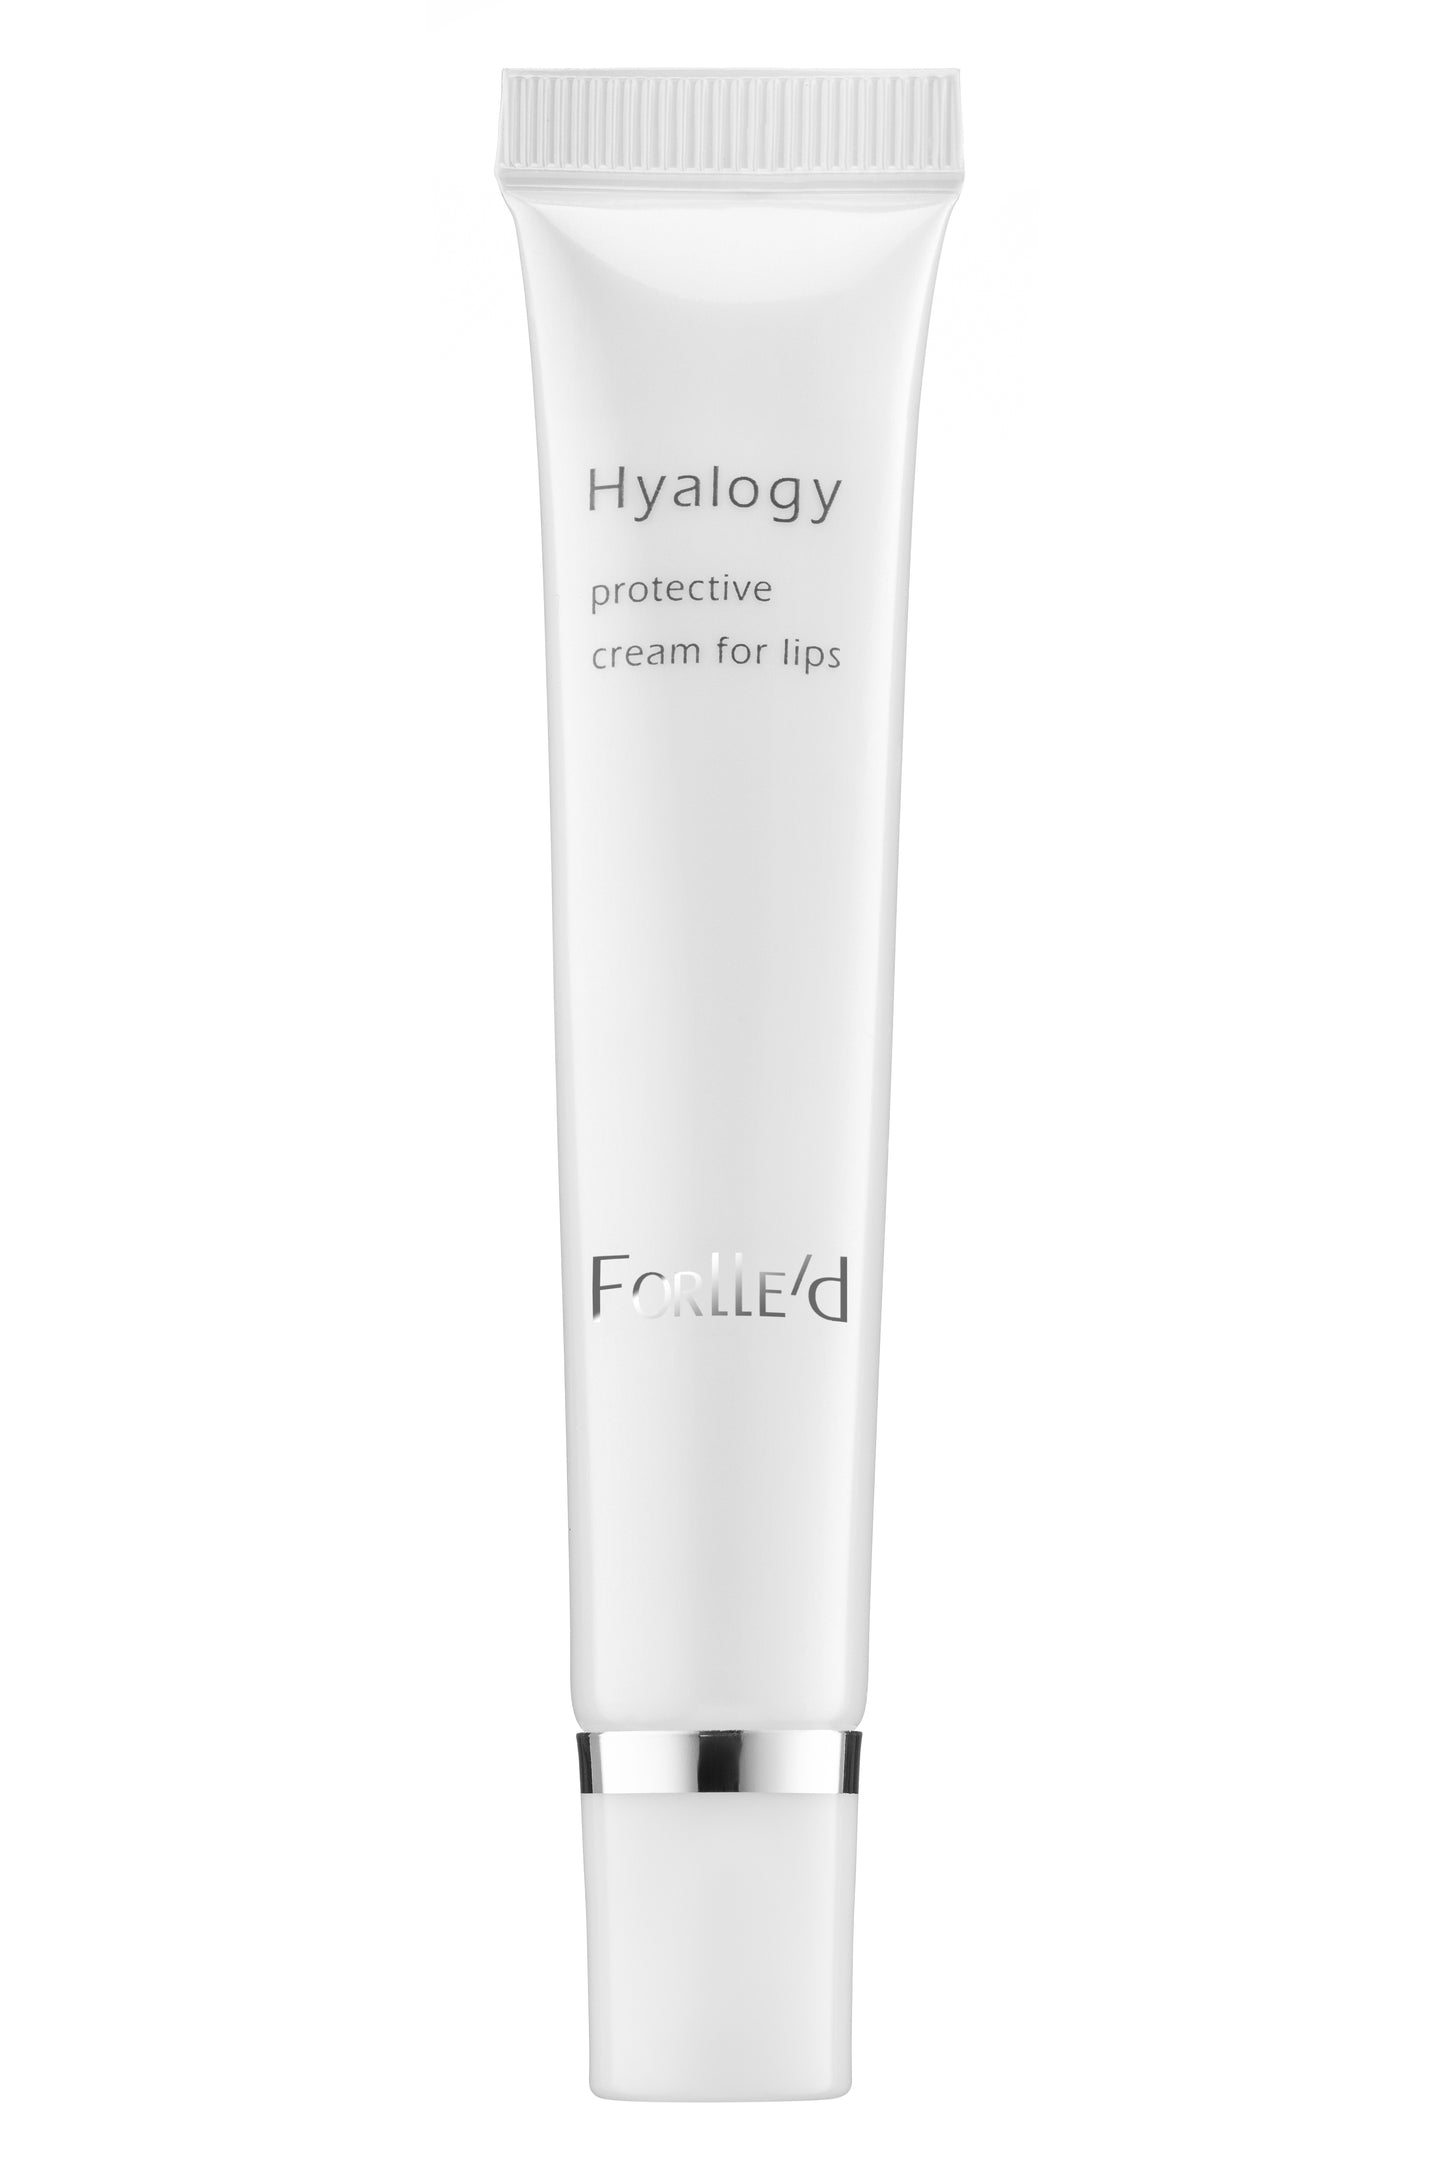 Hyalogy Protective Cream for Lips